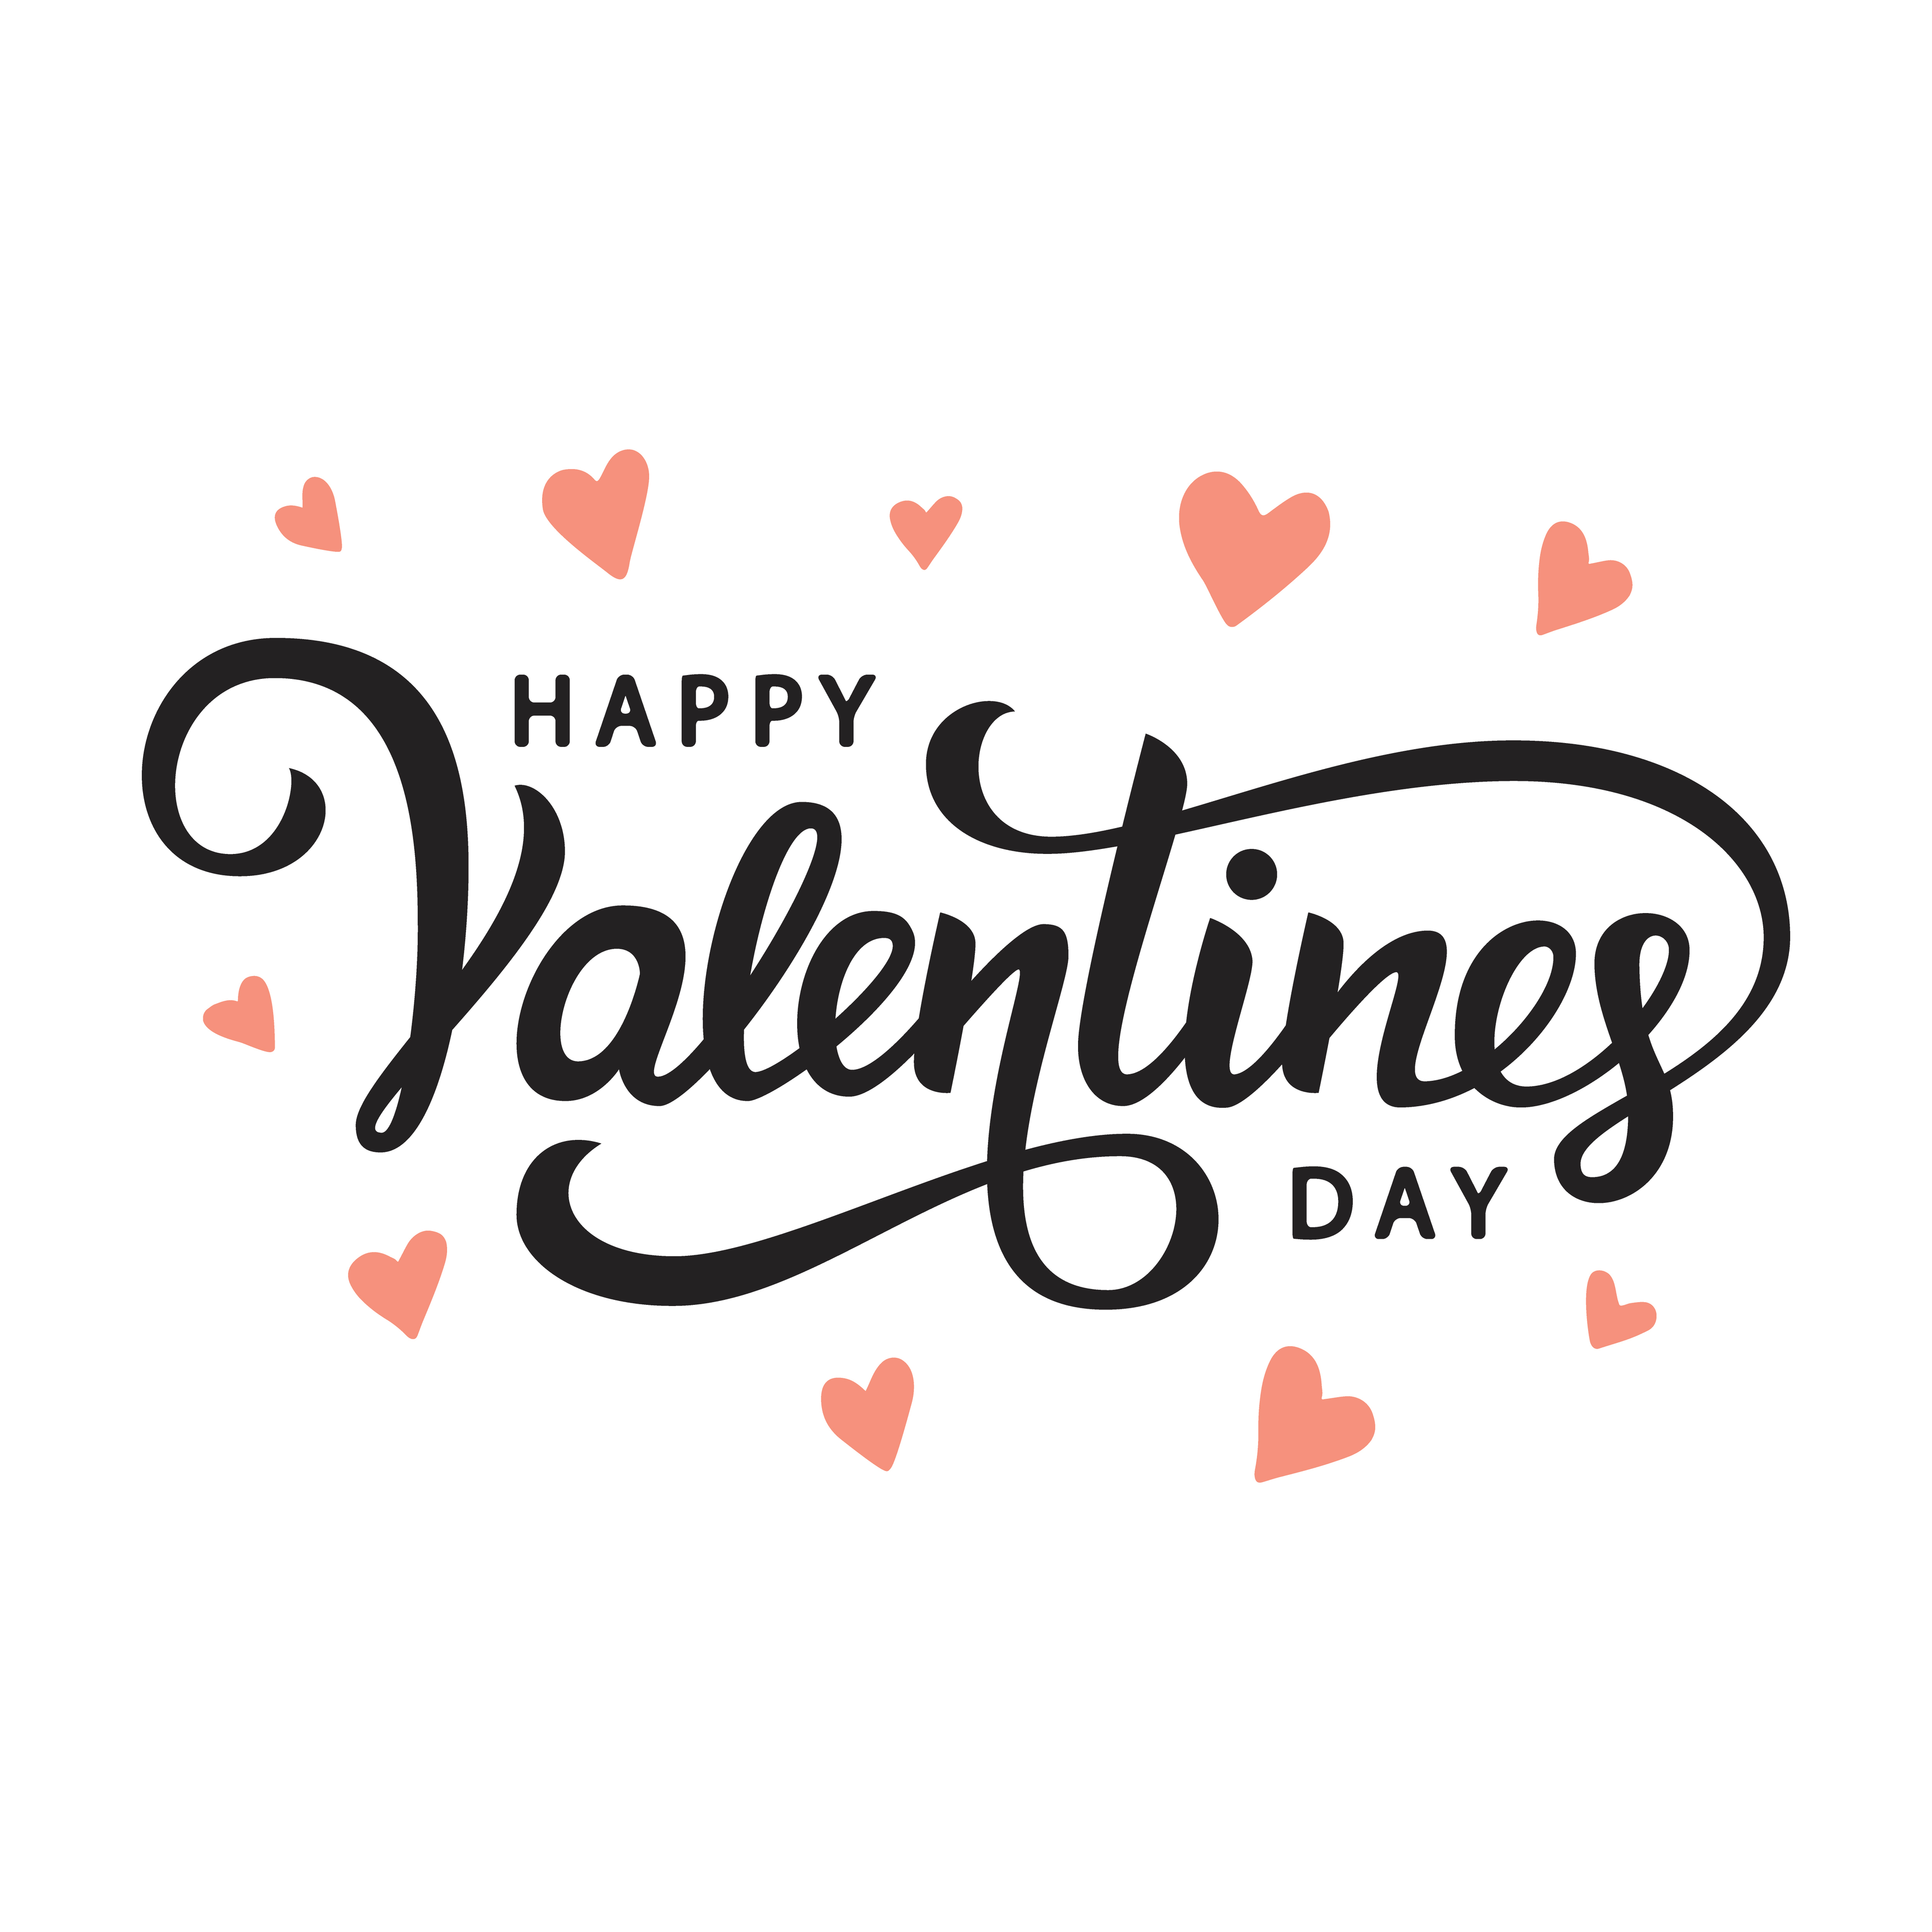 Heart Happy Valentines Day Valentine'S Free Transparent Image HQ Clipart